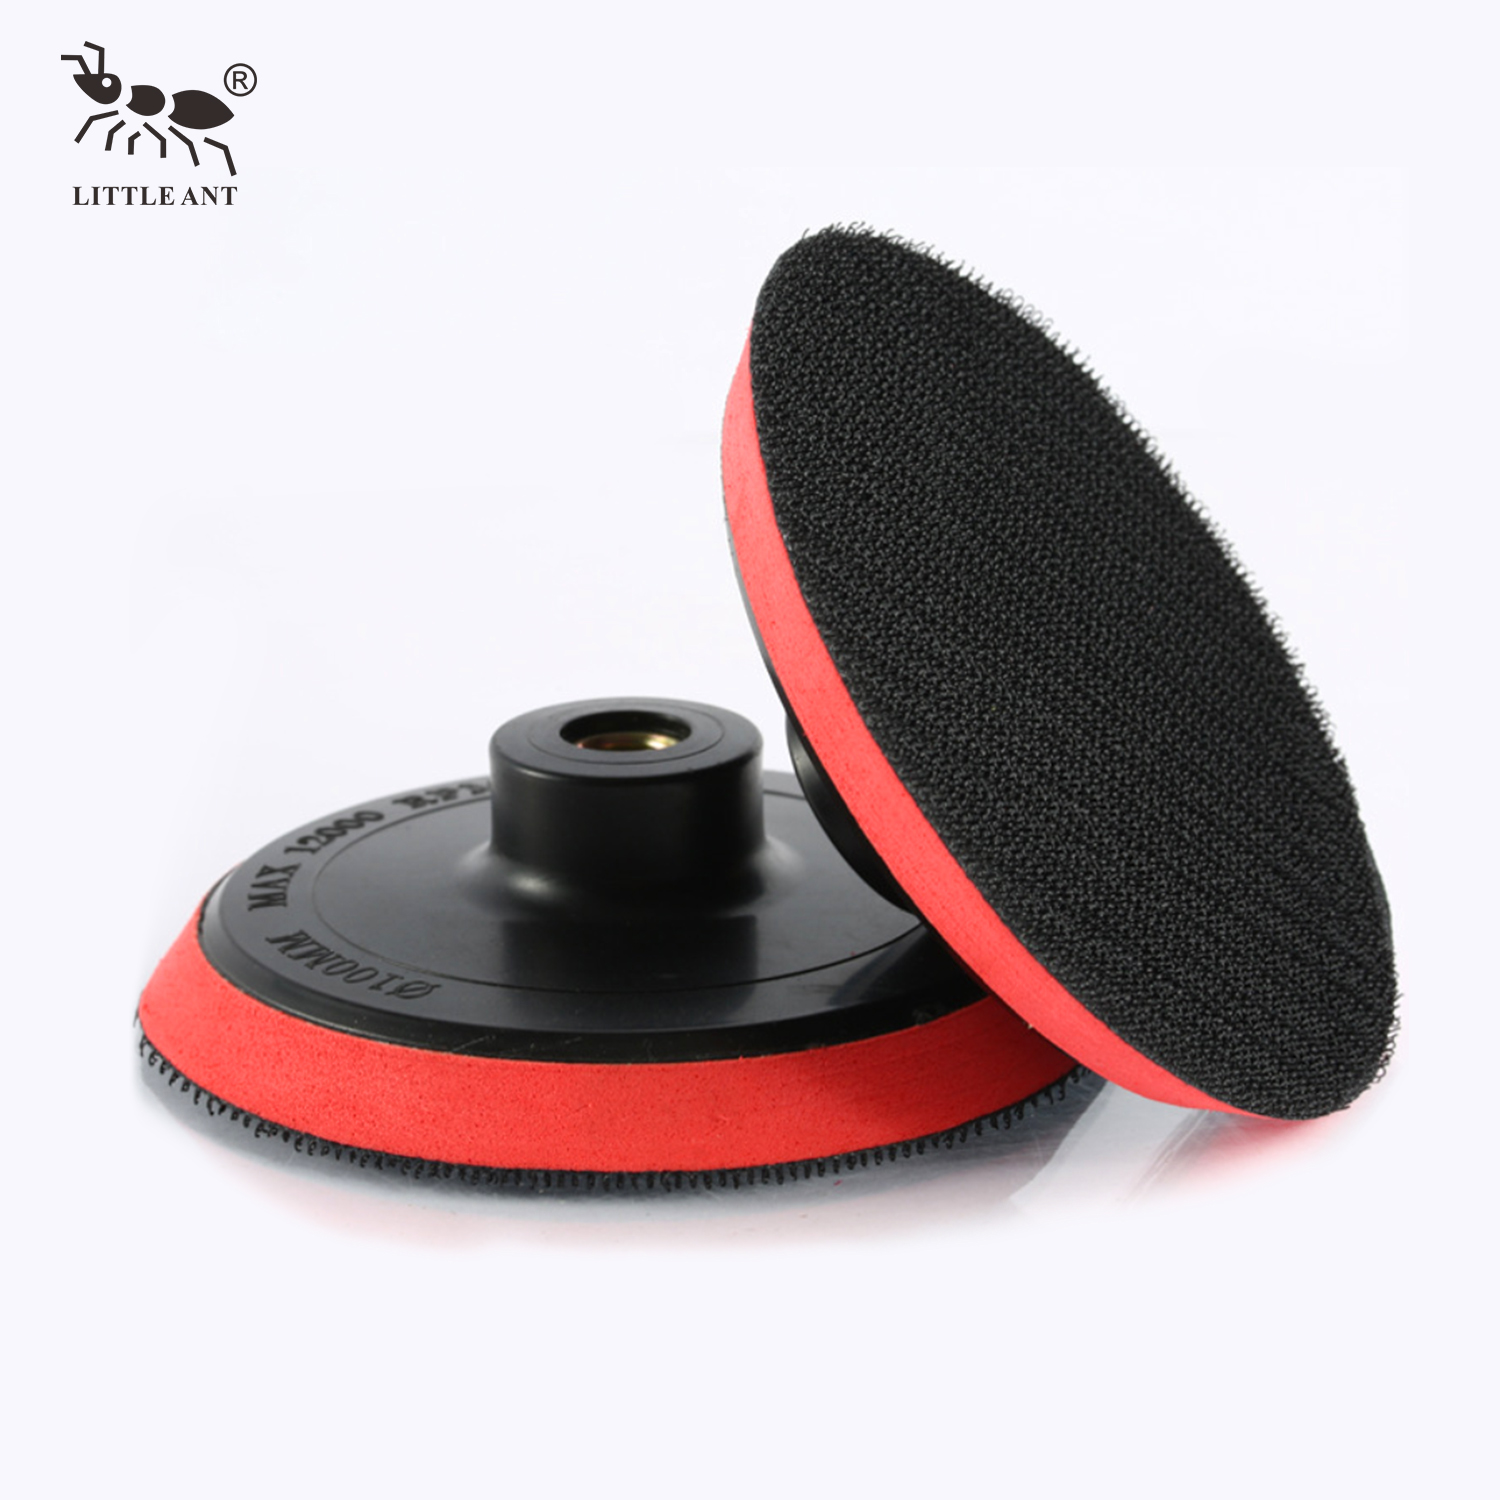 ∮100mm Backer Pad Holder Connecter Double Pasta